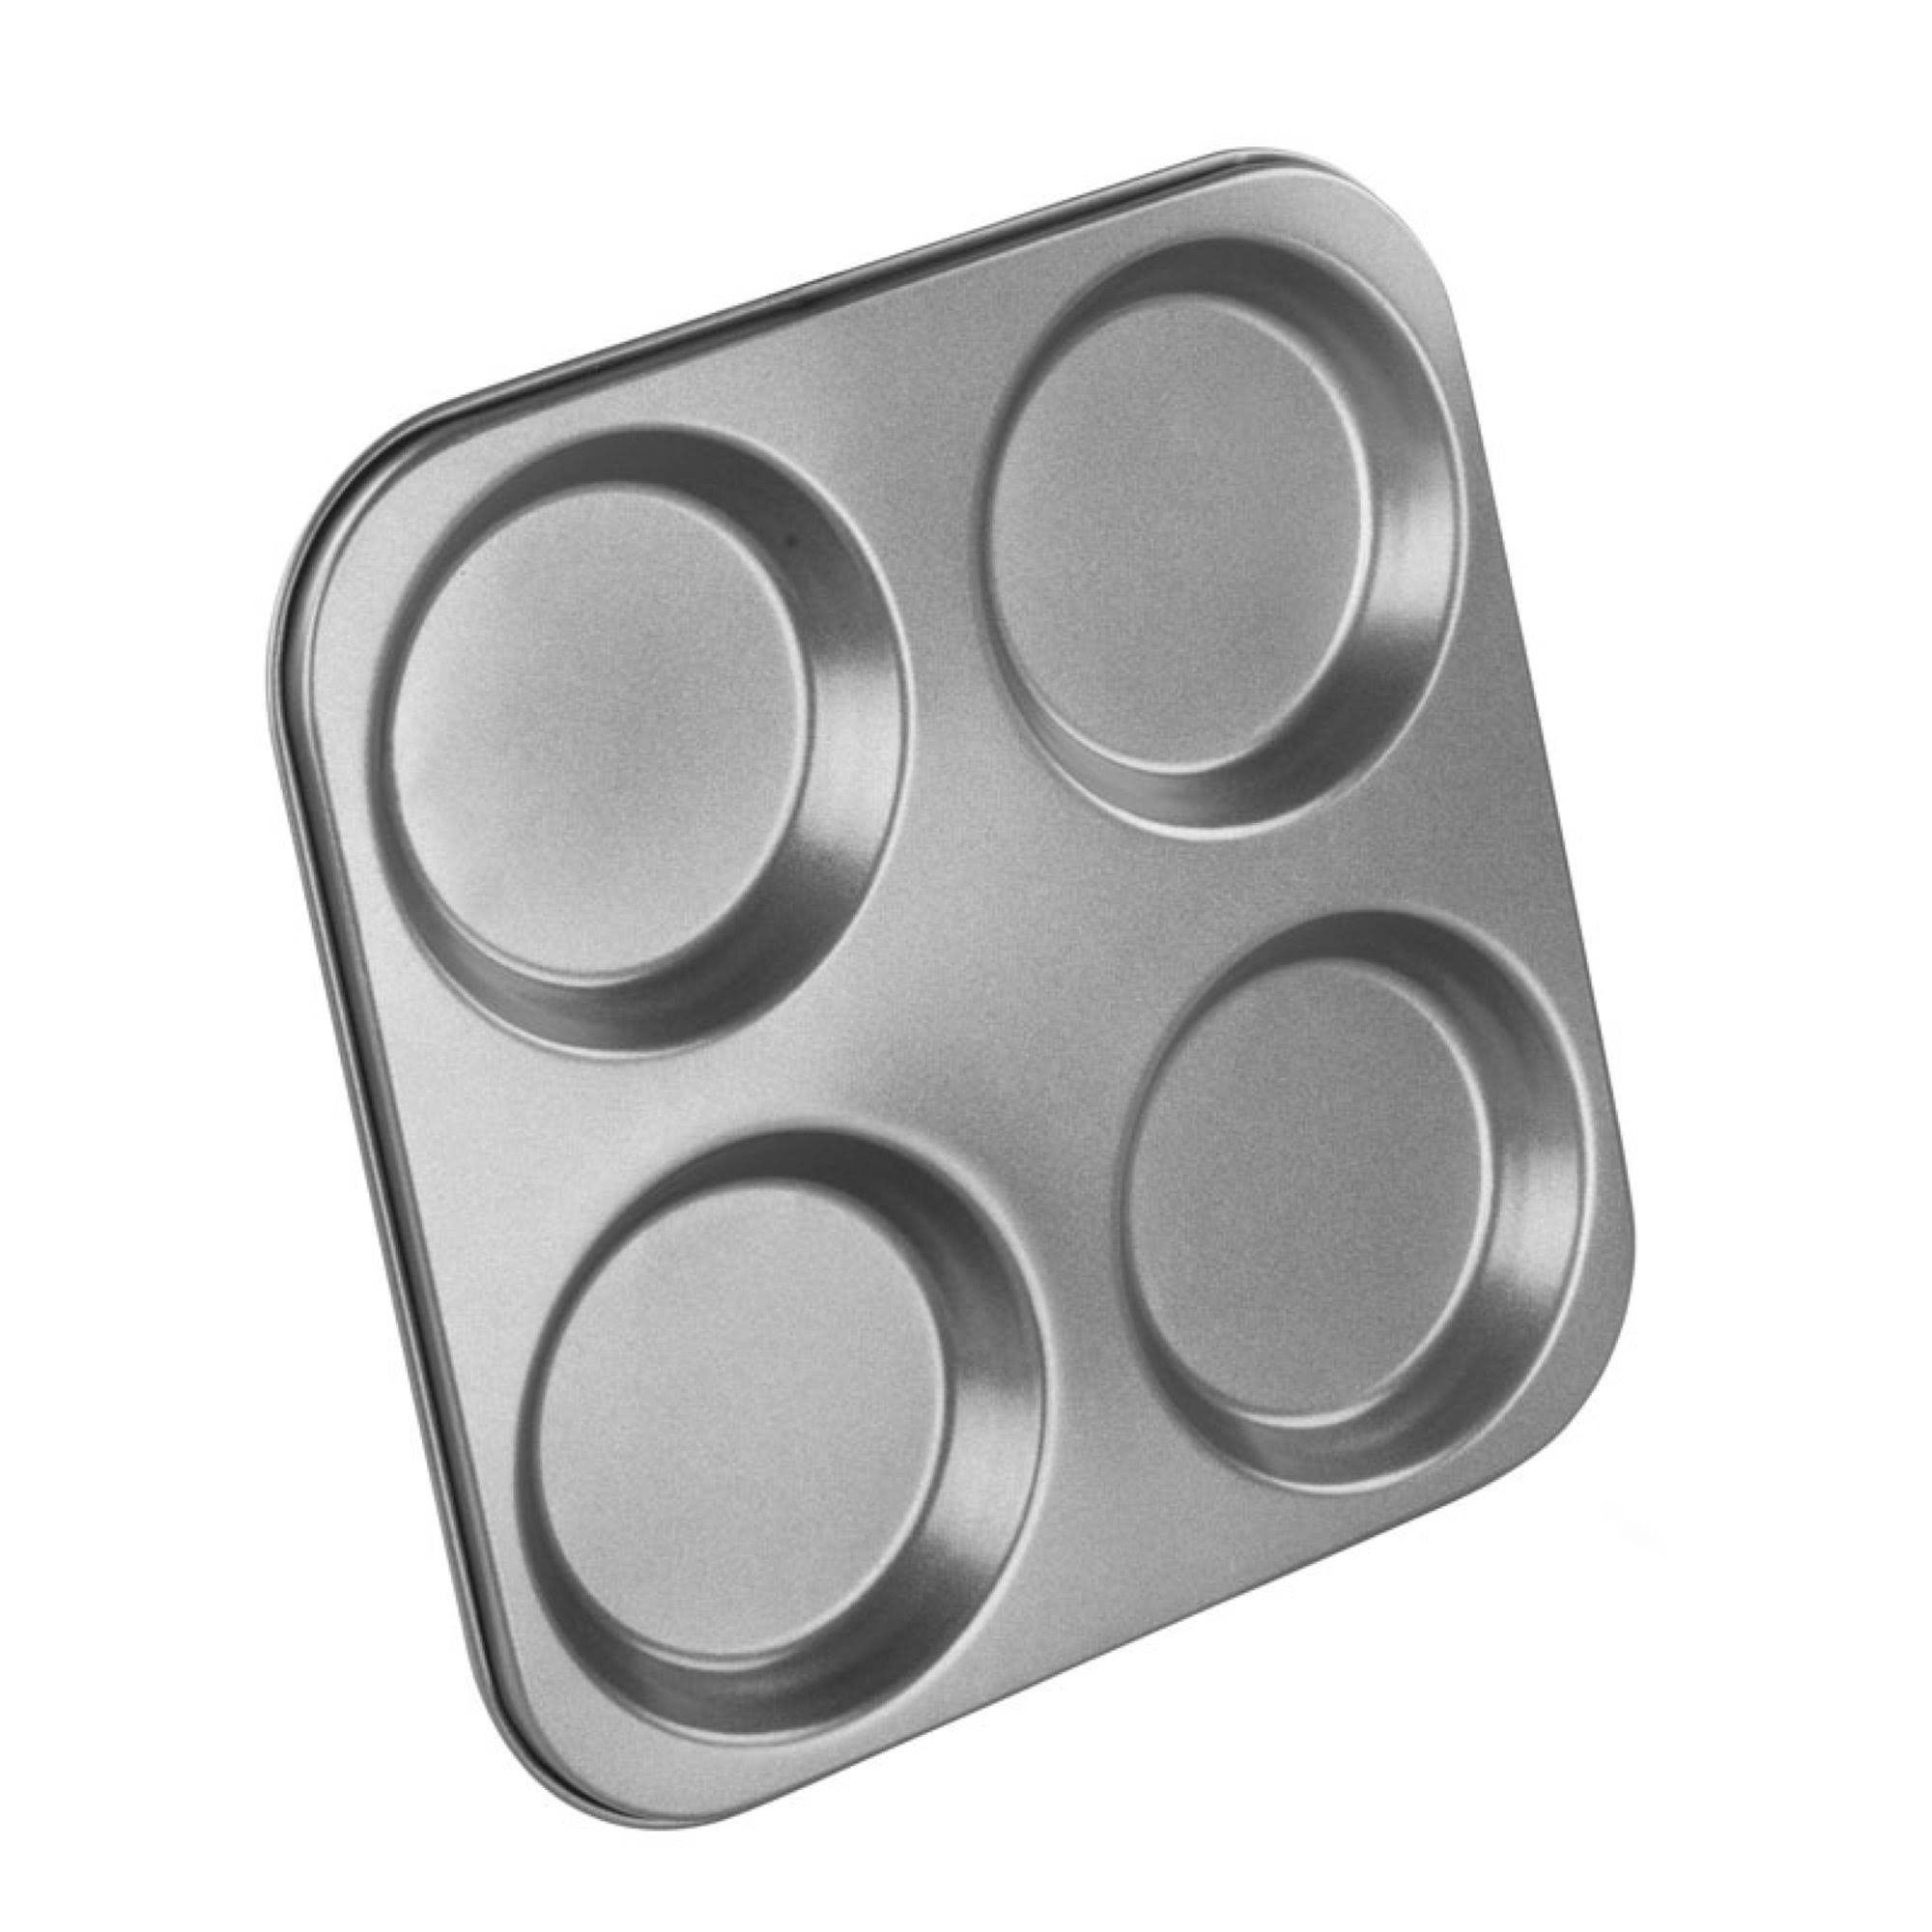 Chef Aid Non Stick Yorkshire Pudding Oven Pan Tray - Black, 4 Hole